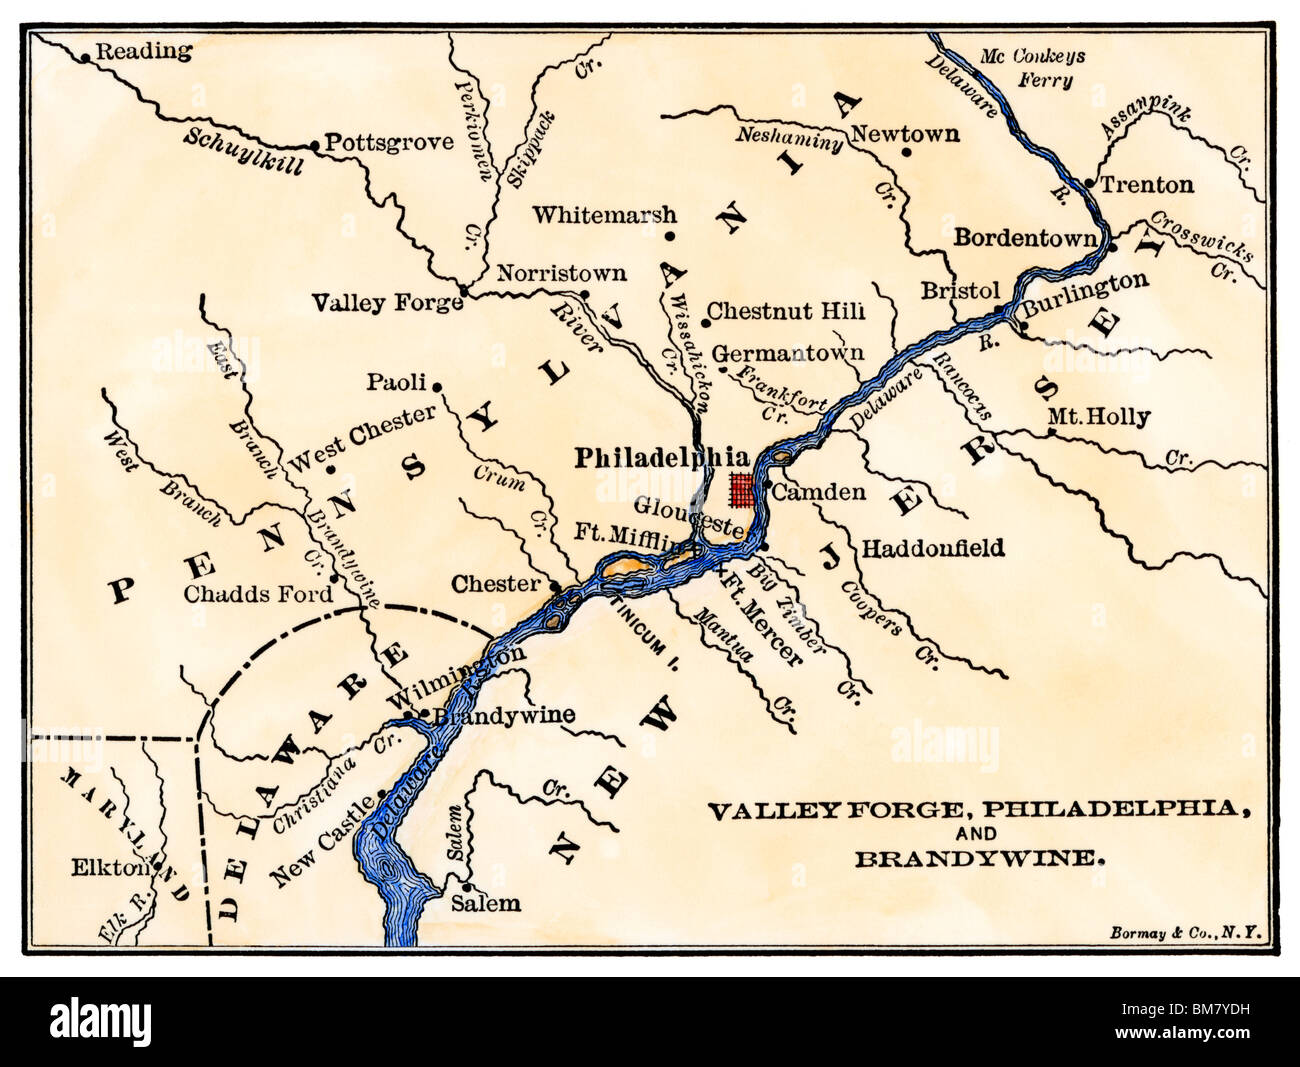 Map Of The Philadelphia Area Valley Forge And The Brandywine Hand BM7YDH 